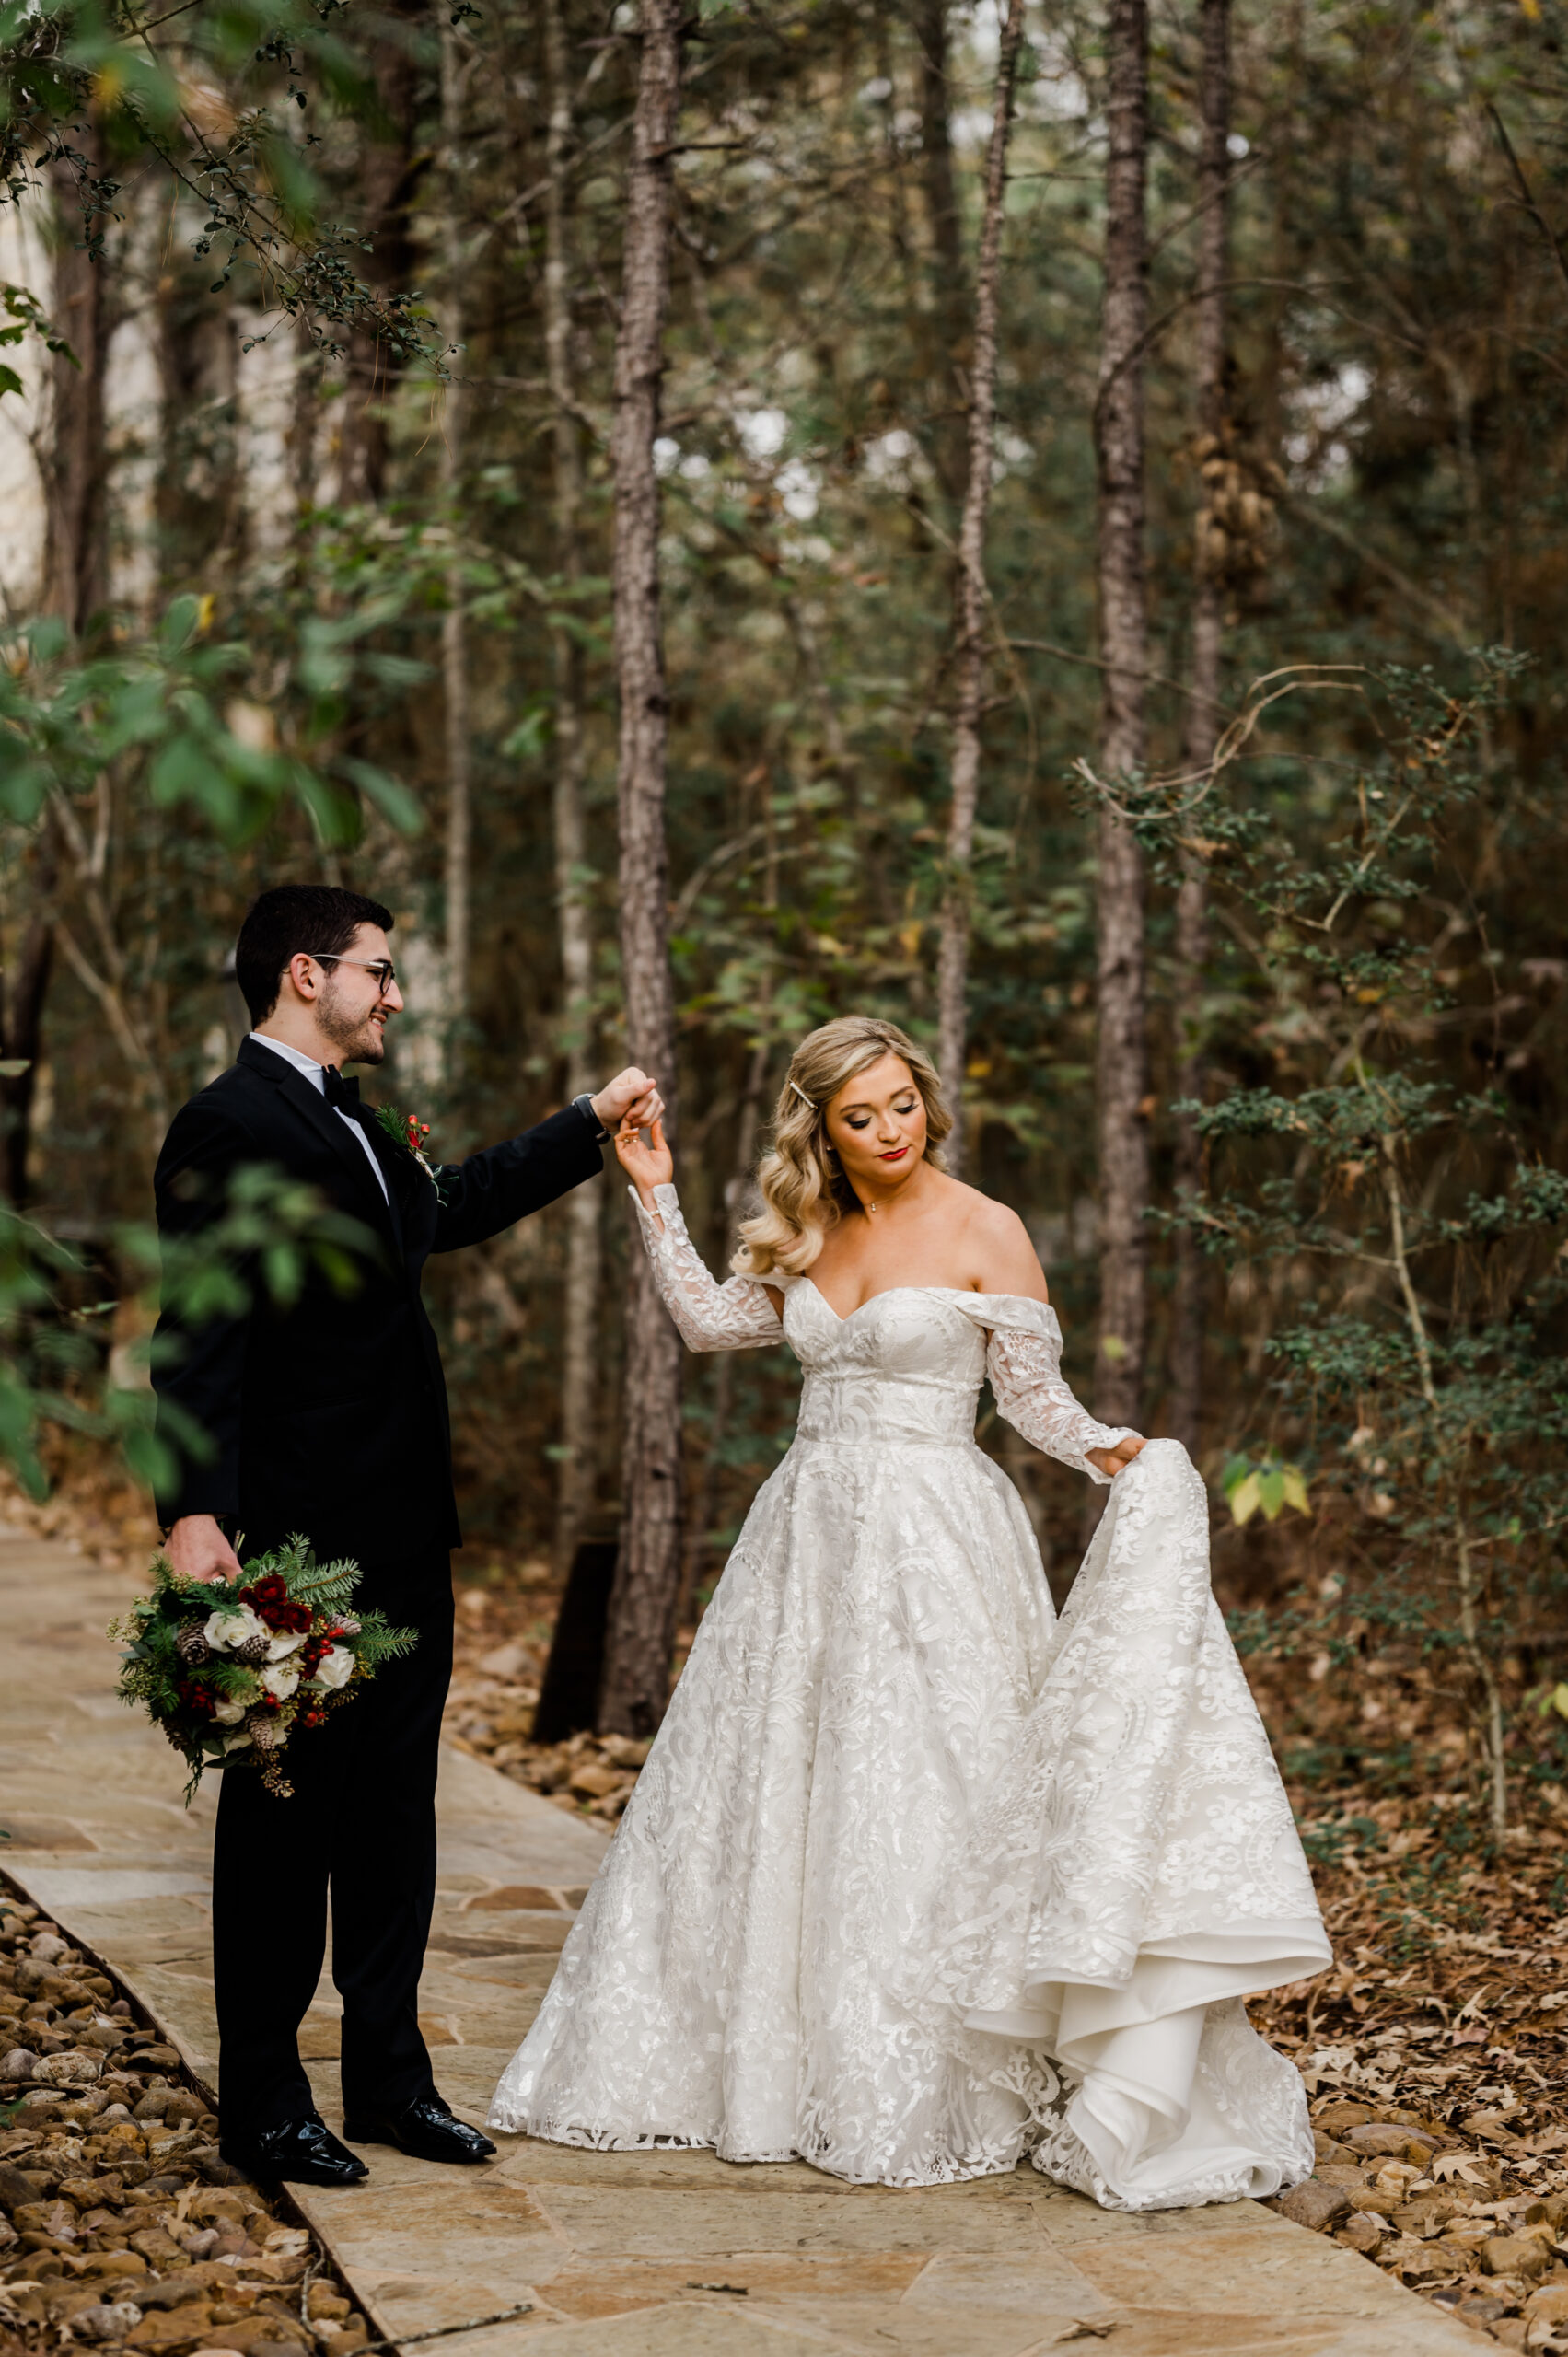 Anne and Tristan's Wedding in Magnolia, Texas with Rachel Driskell Photography